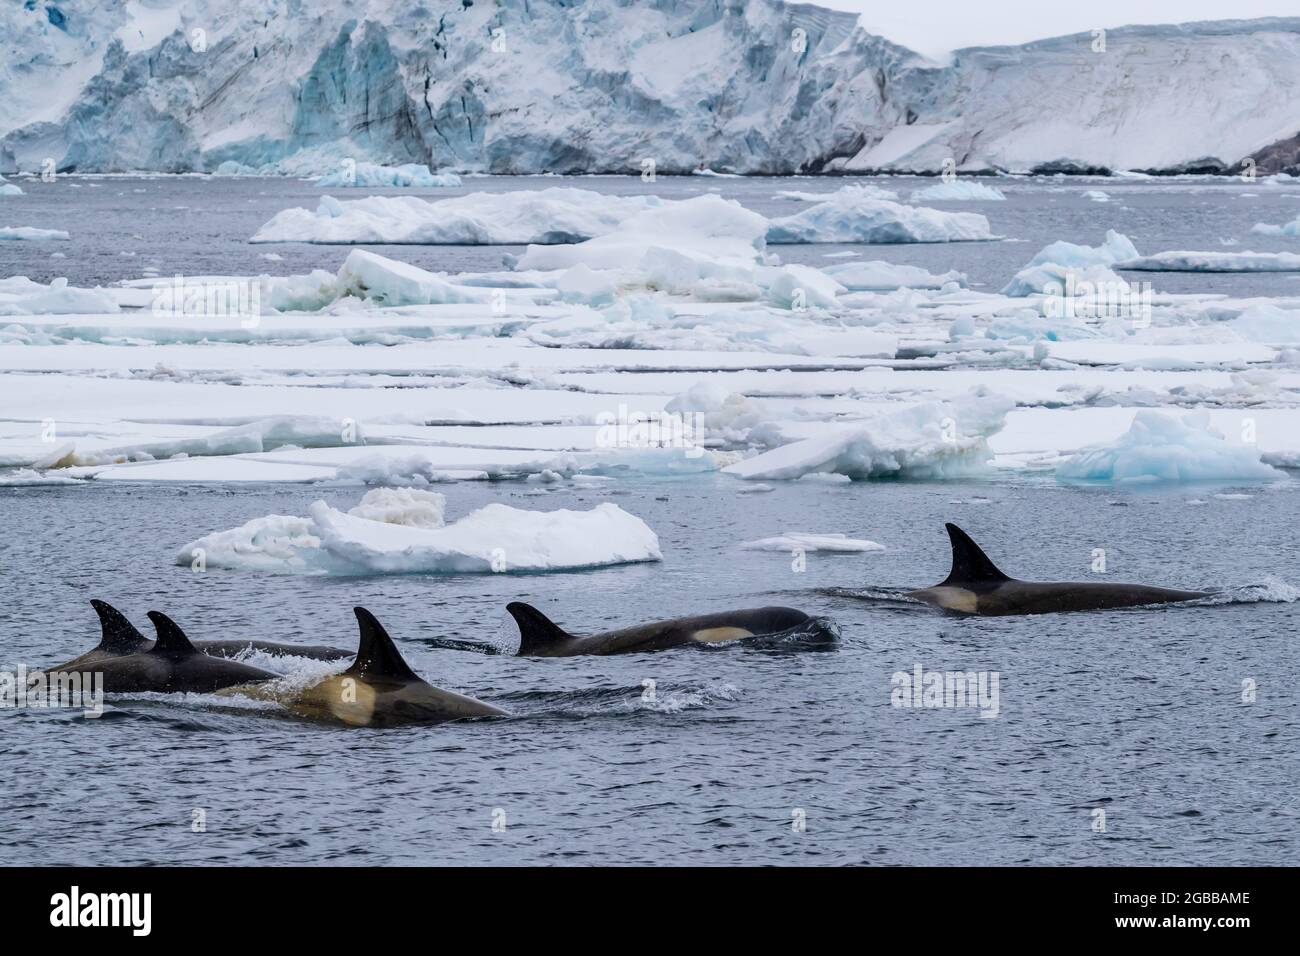 Ecotype Big B killer whales (Orcinus orca), surfacing amongst ice floes in the Lemaire Channel, Antarctica, Polar Regions Stock Photo